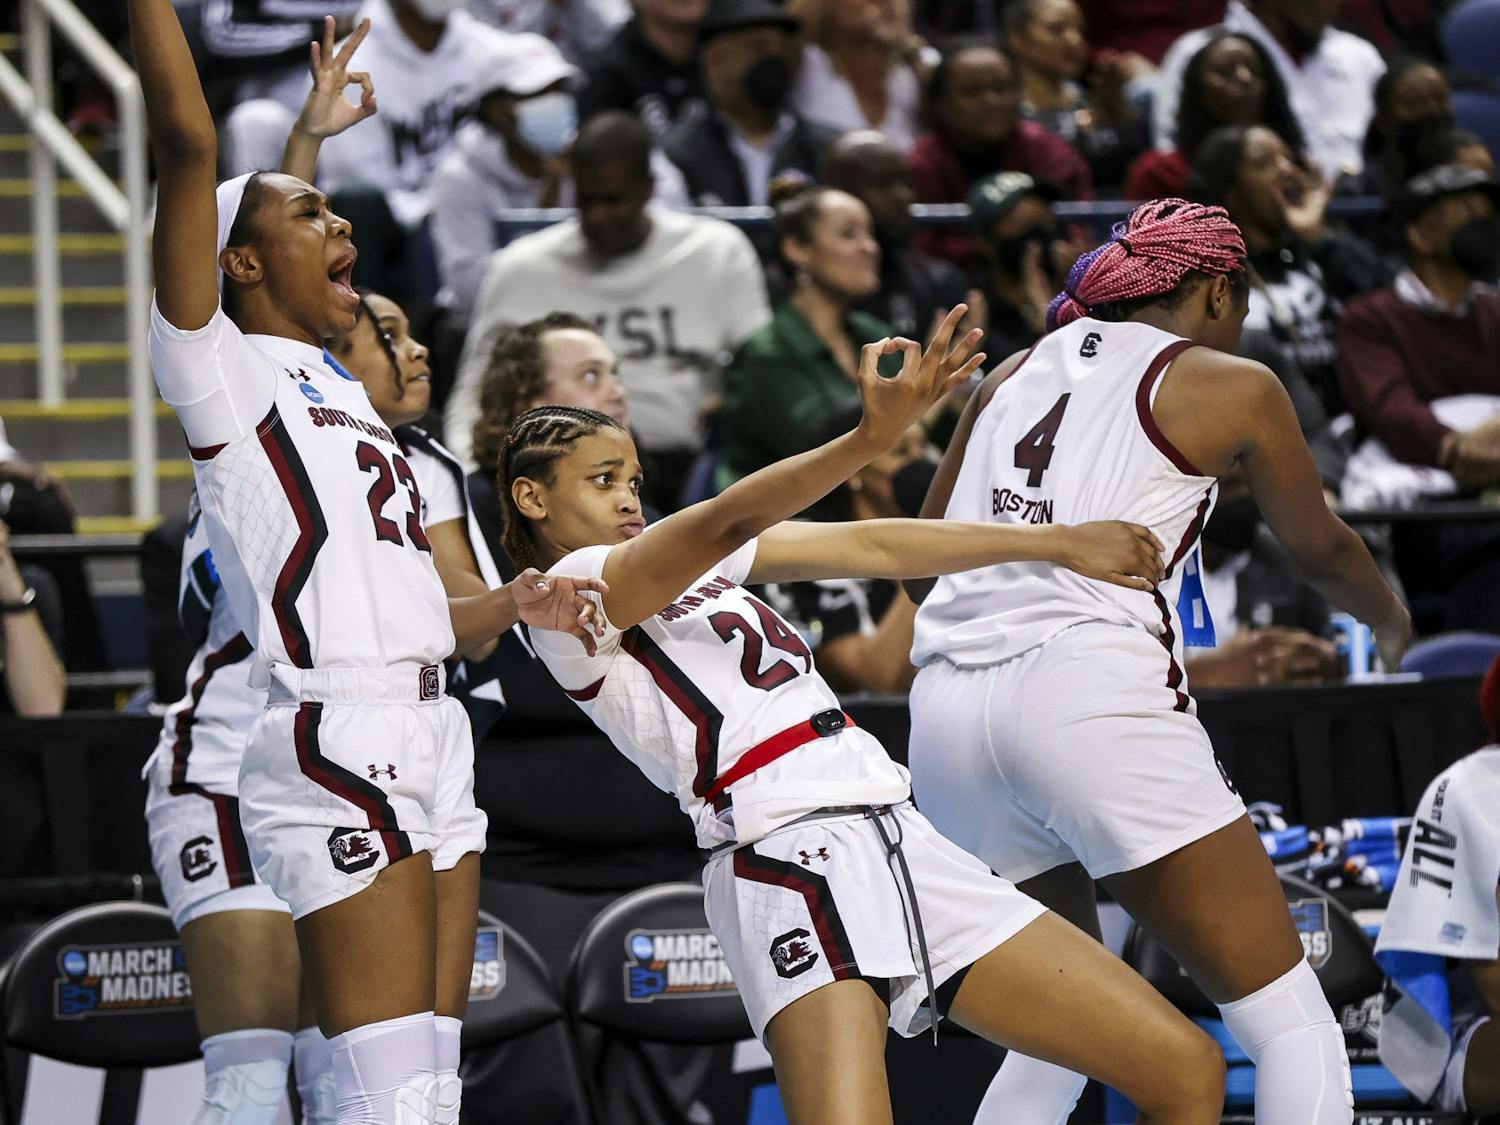 South Carolina bench celebrates a three-pointer during the fourth quarter of South Carolina's 80-50 victory over Creighton in the Elite Eight on Sunday, March 27, 2022. The win propelled the team to the Final Four.&nbsp;